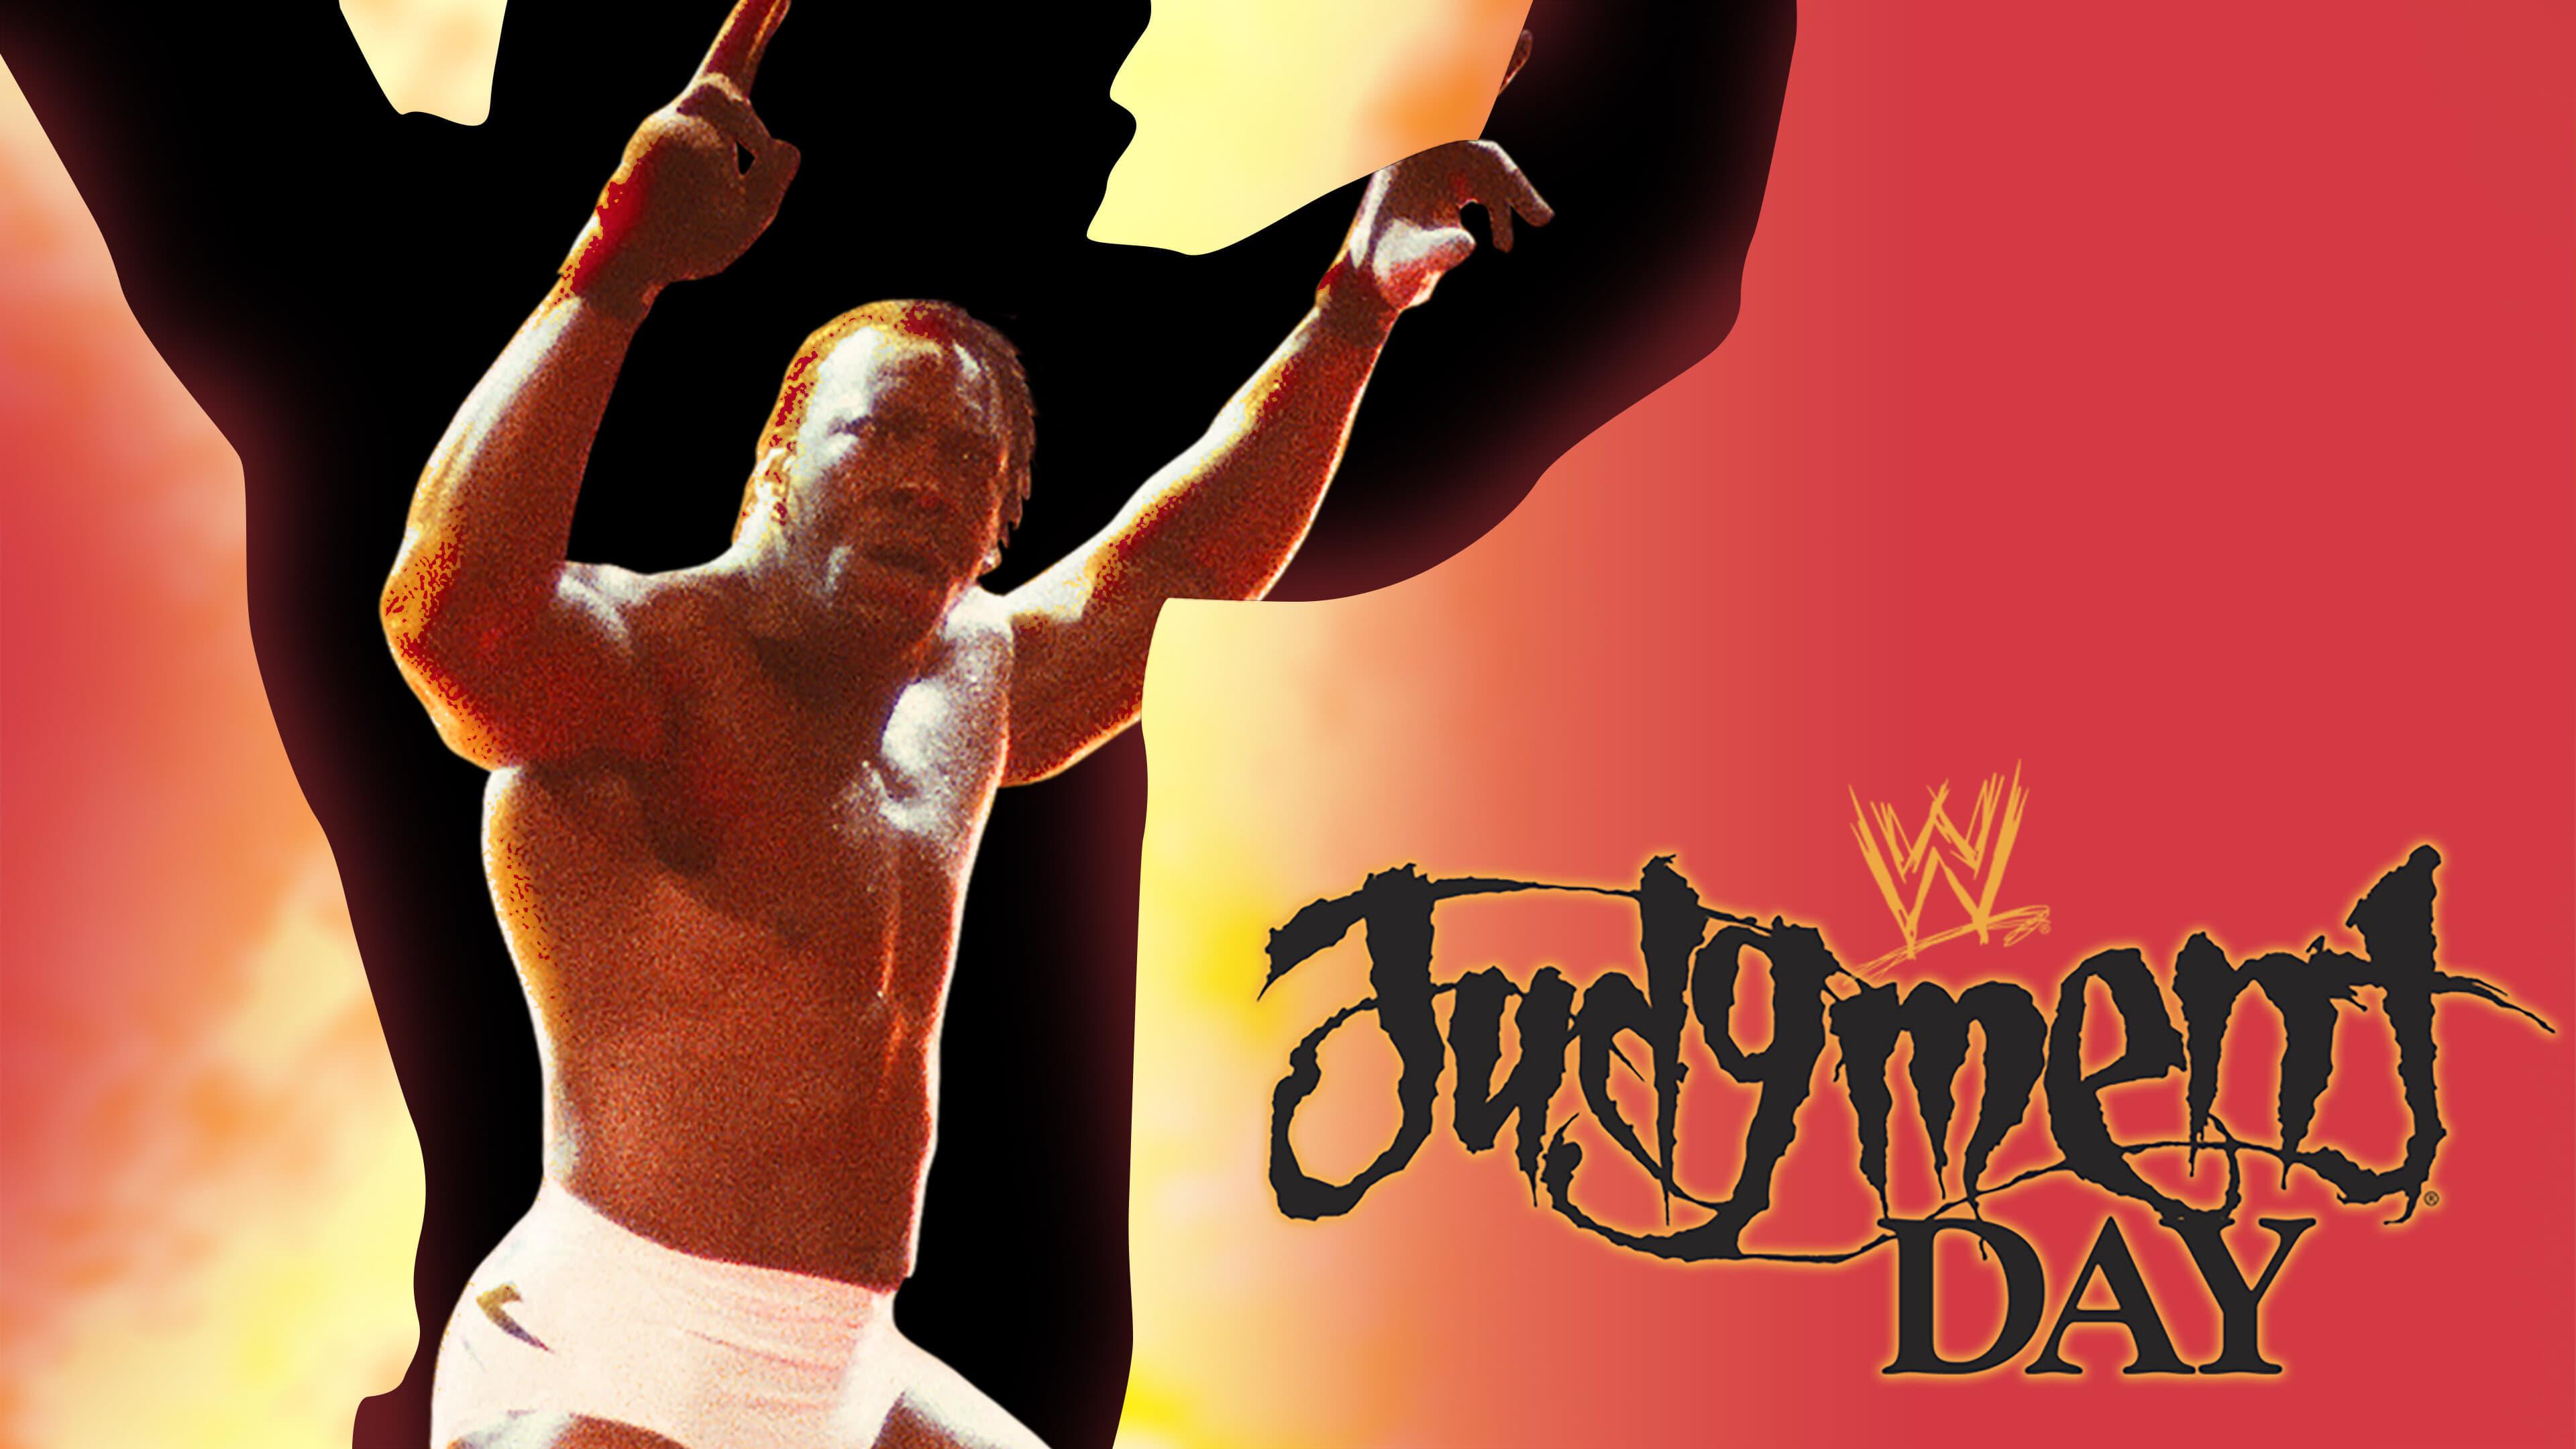 WWE Judgment Day 2003 backdrop